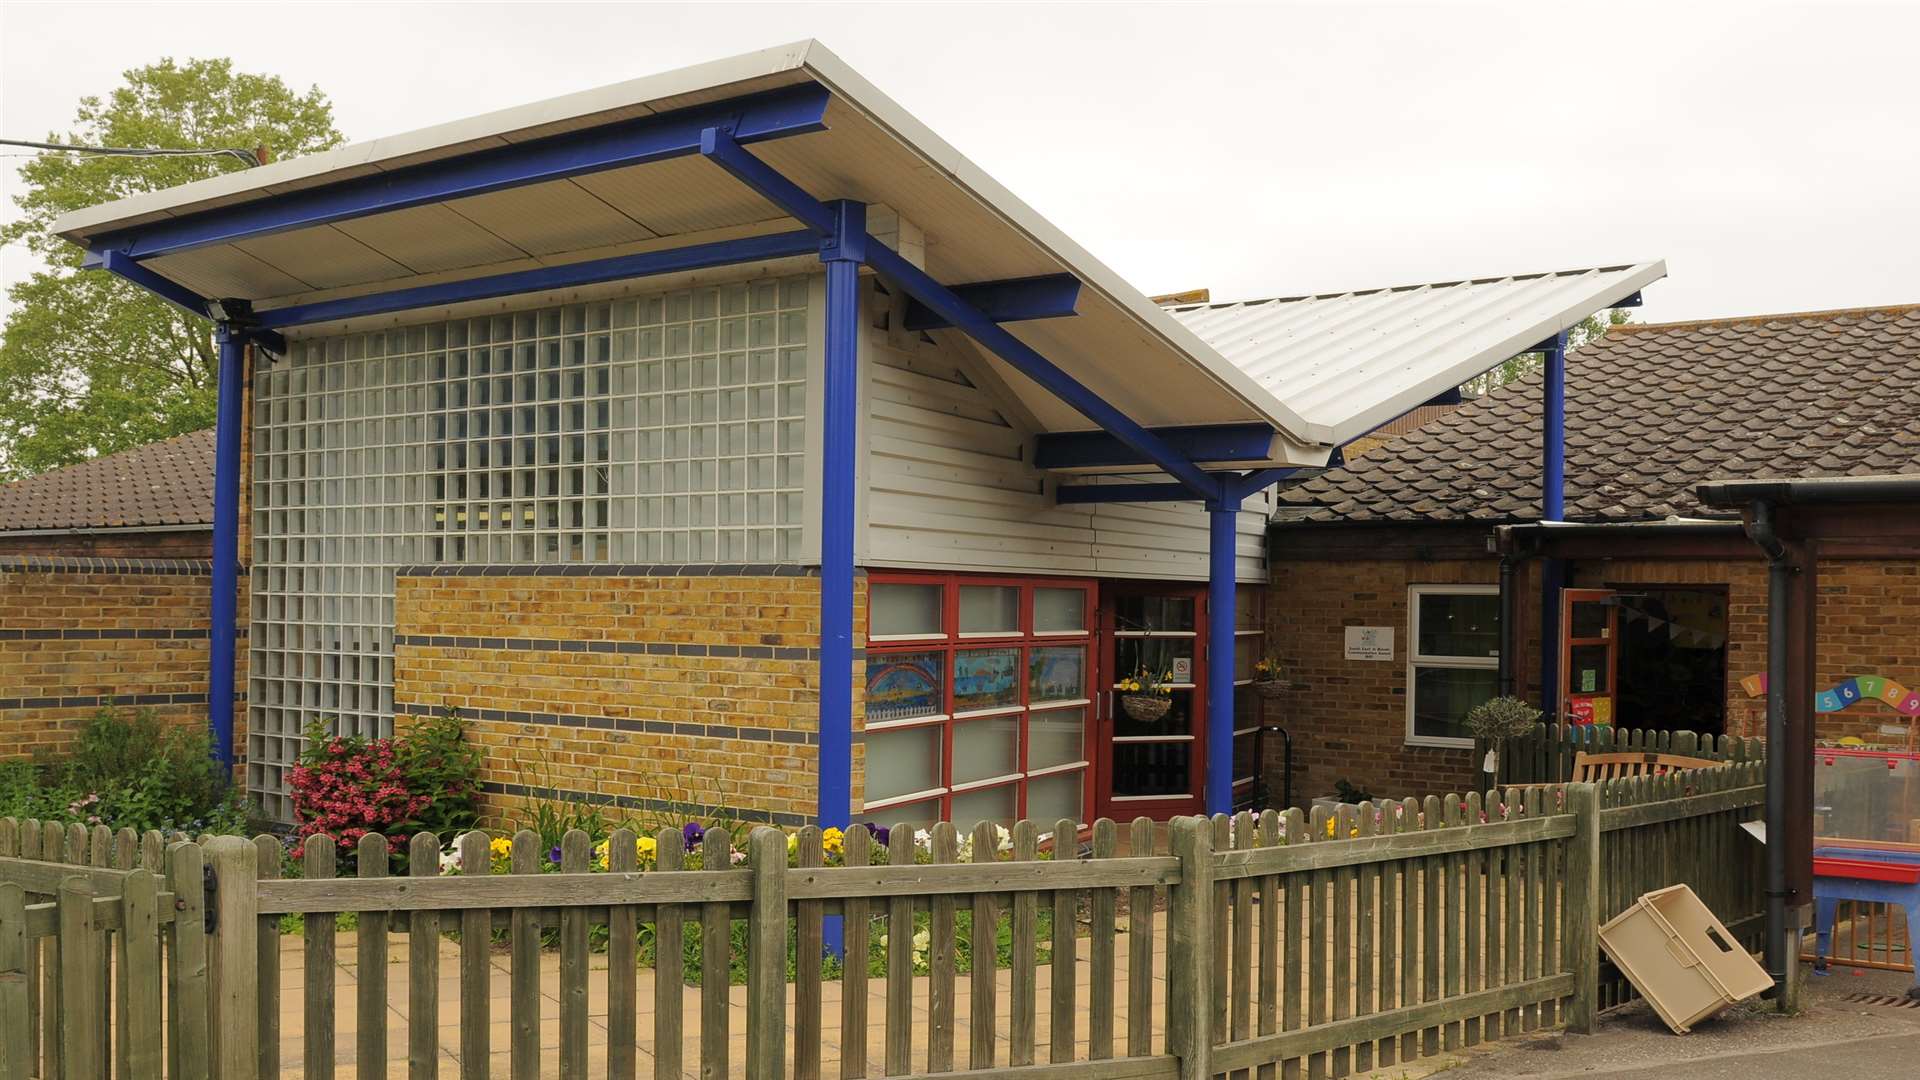 Eastchurch Primary School, All Saints site, Warden Road, Eastchurch